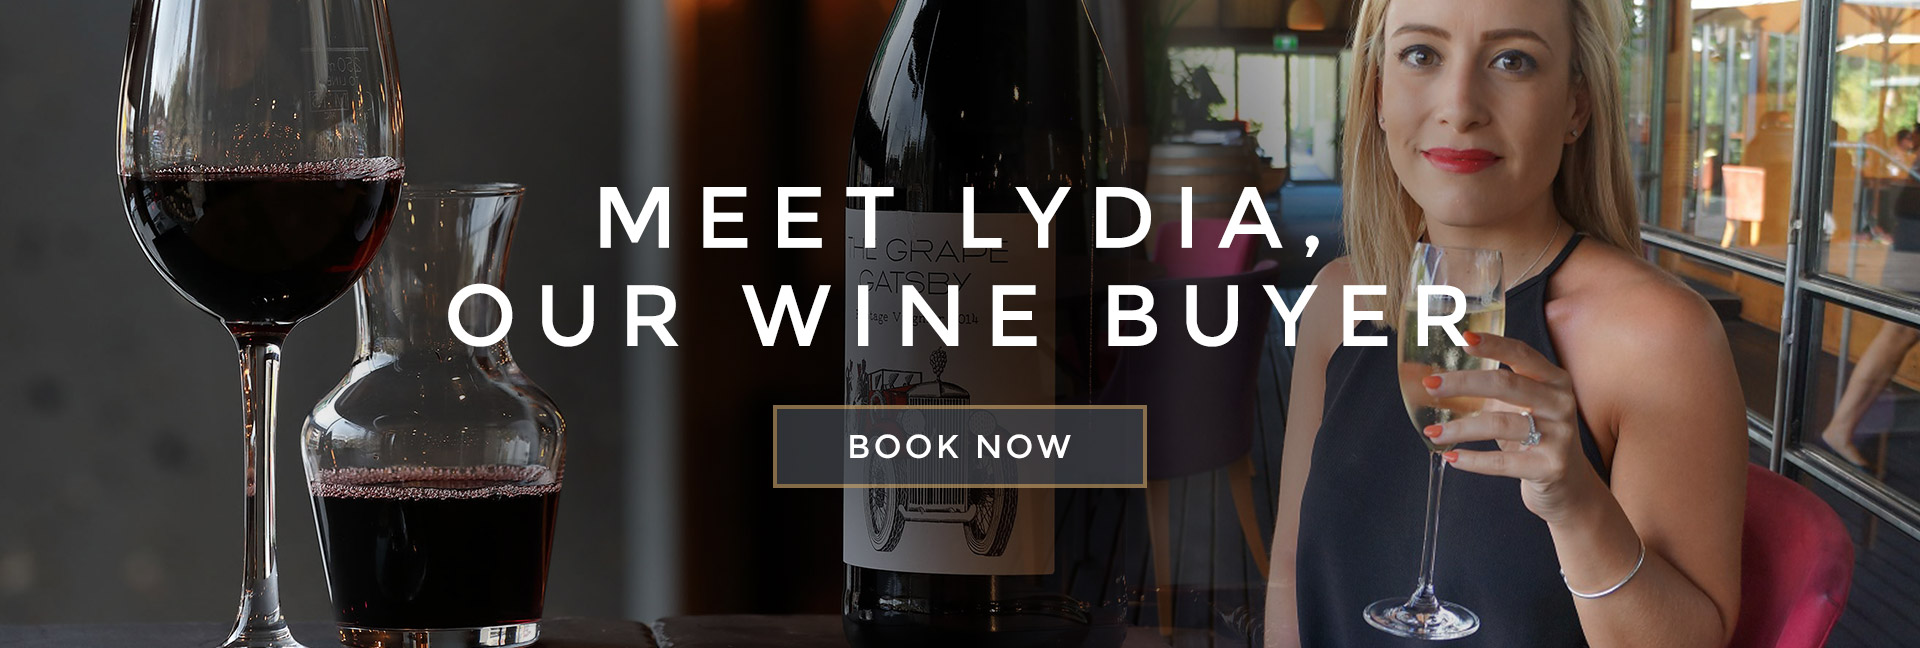 Meet Lydia, our wine buyer at All Bar One Newhall Street Birmingham